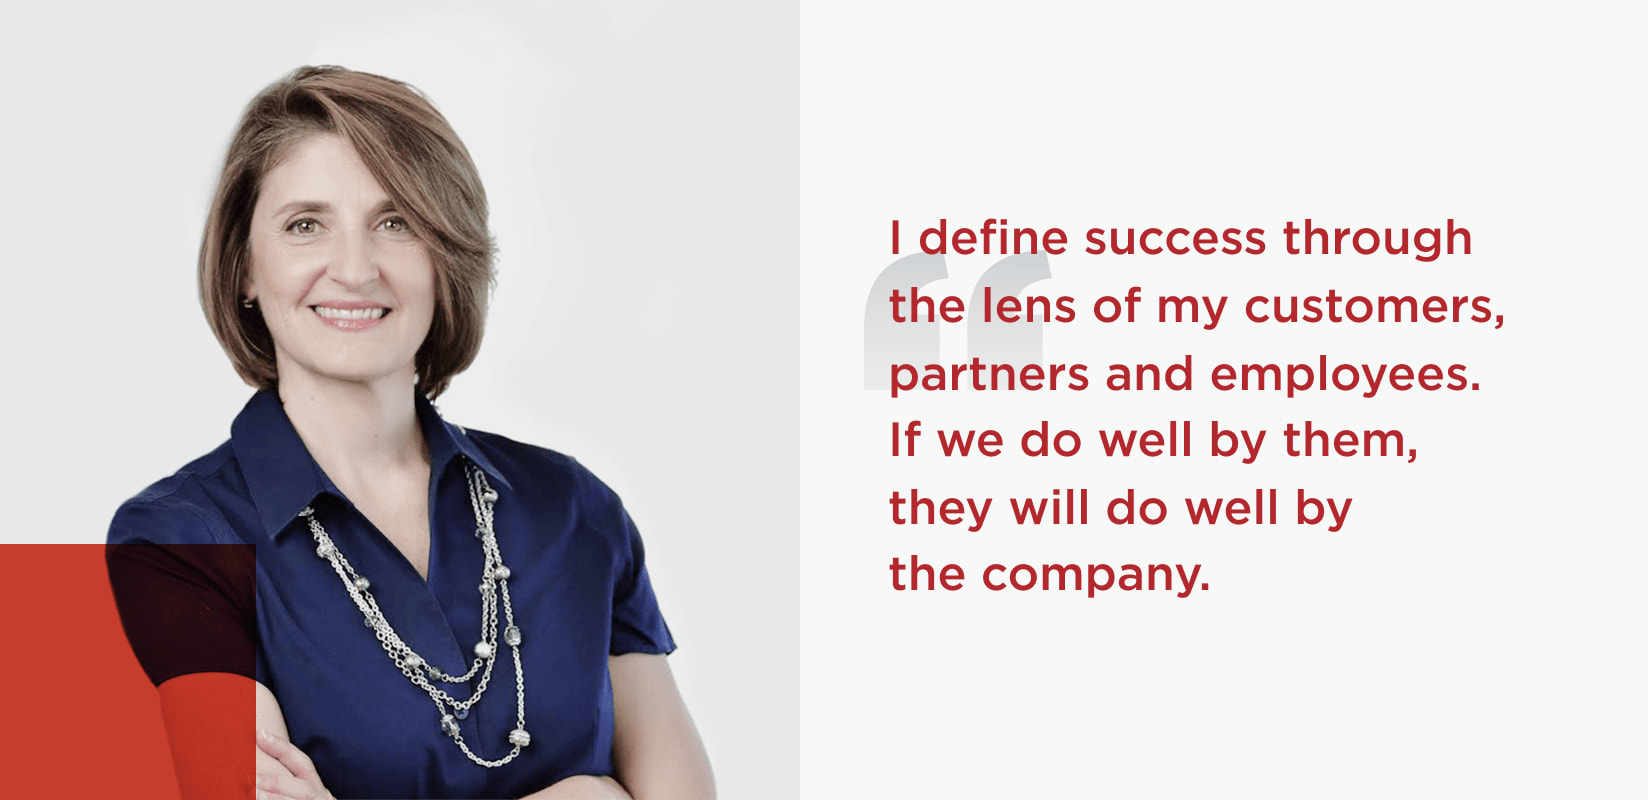 Quote from Candace Worley, Chief Product Officer. I define success through the lens of my customers, partners and employees. If we do well by them, they will do well by the company.